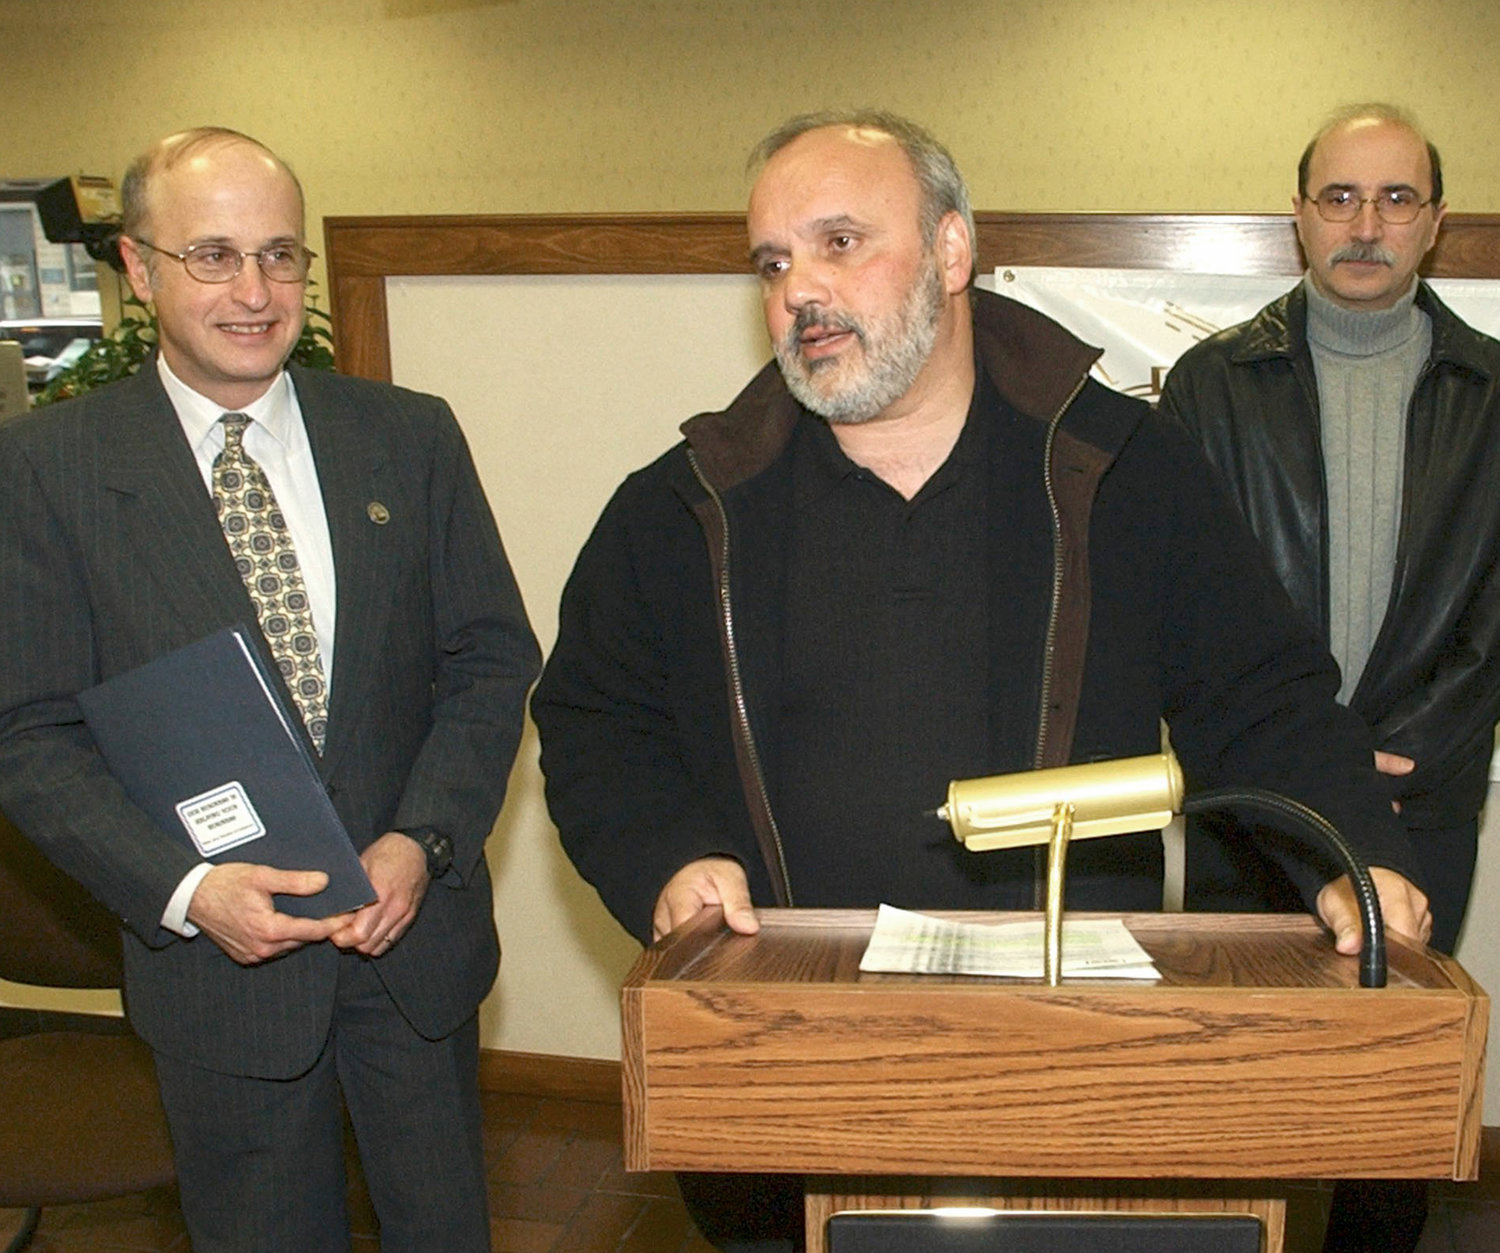 Former Rome Area Chamber of Commerce President William K. Guglielmo, left, helps kick off a past Honor America Days press conference with the late Chris Destito, center, and fellow Honor America Days committee member Larry Daniello in this 1990s file photo.